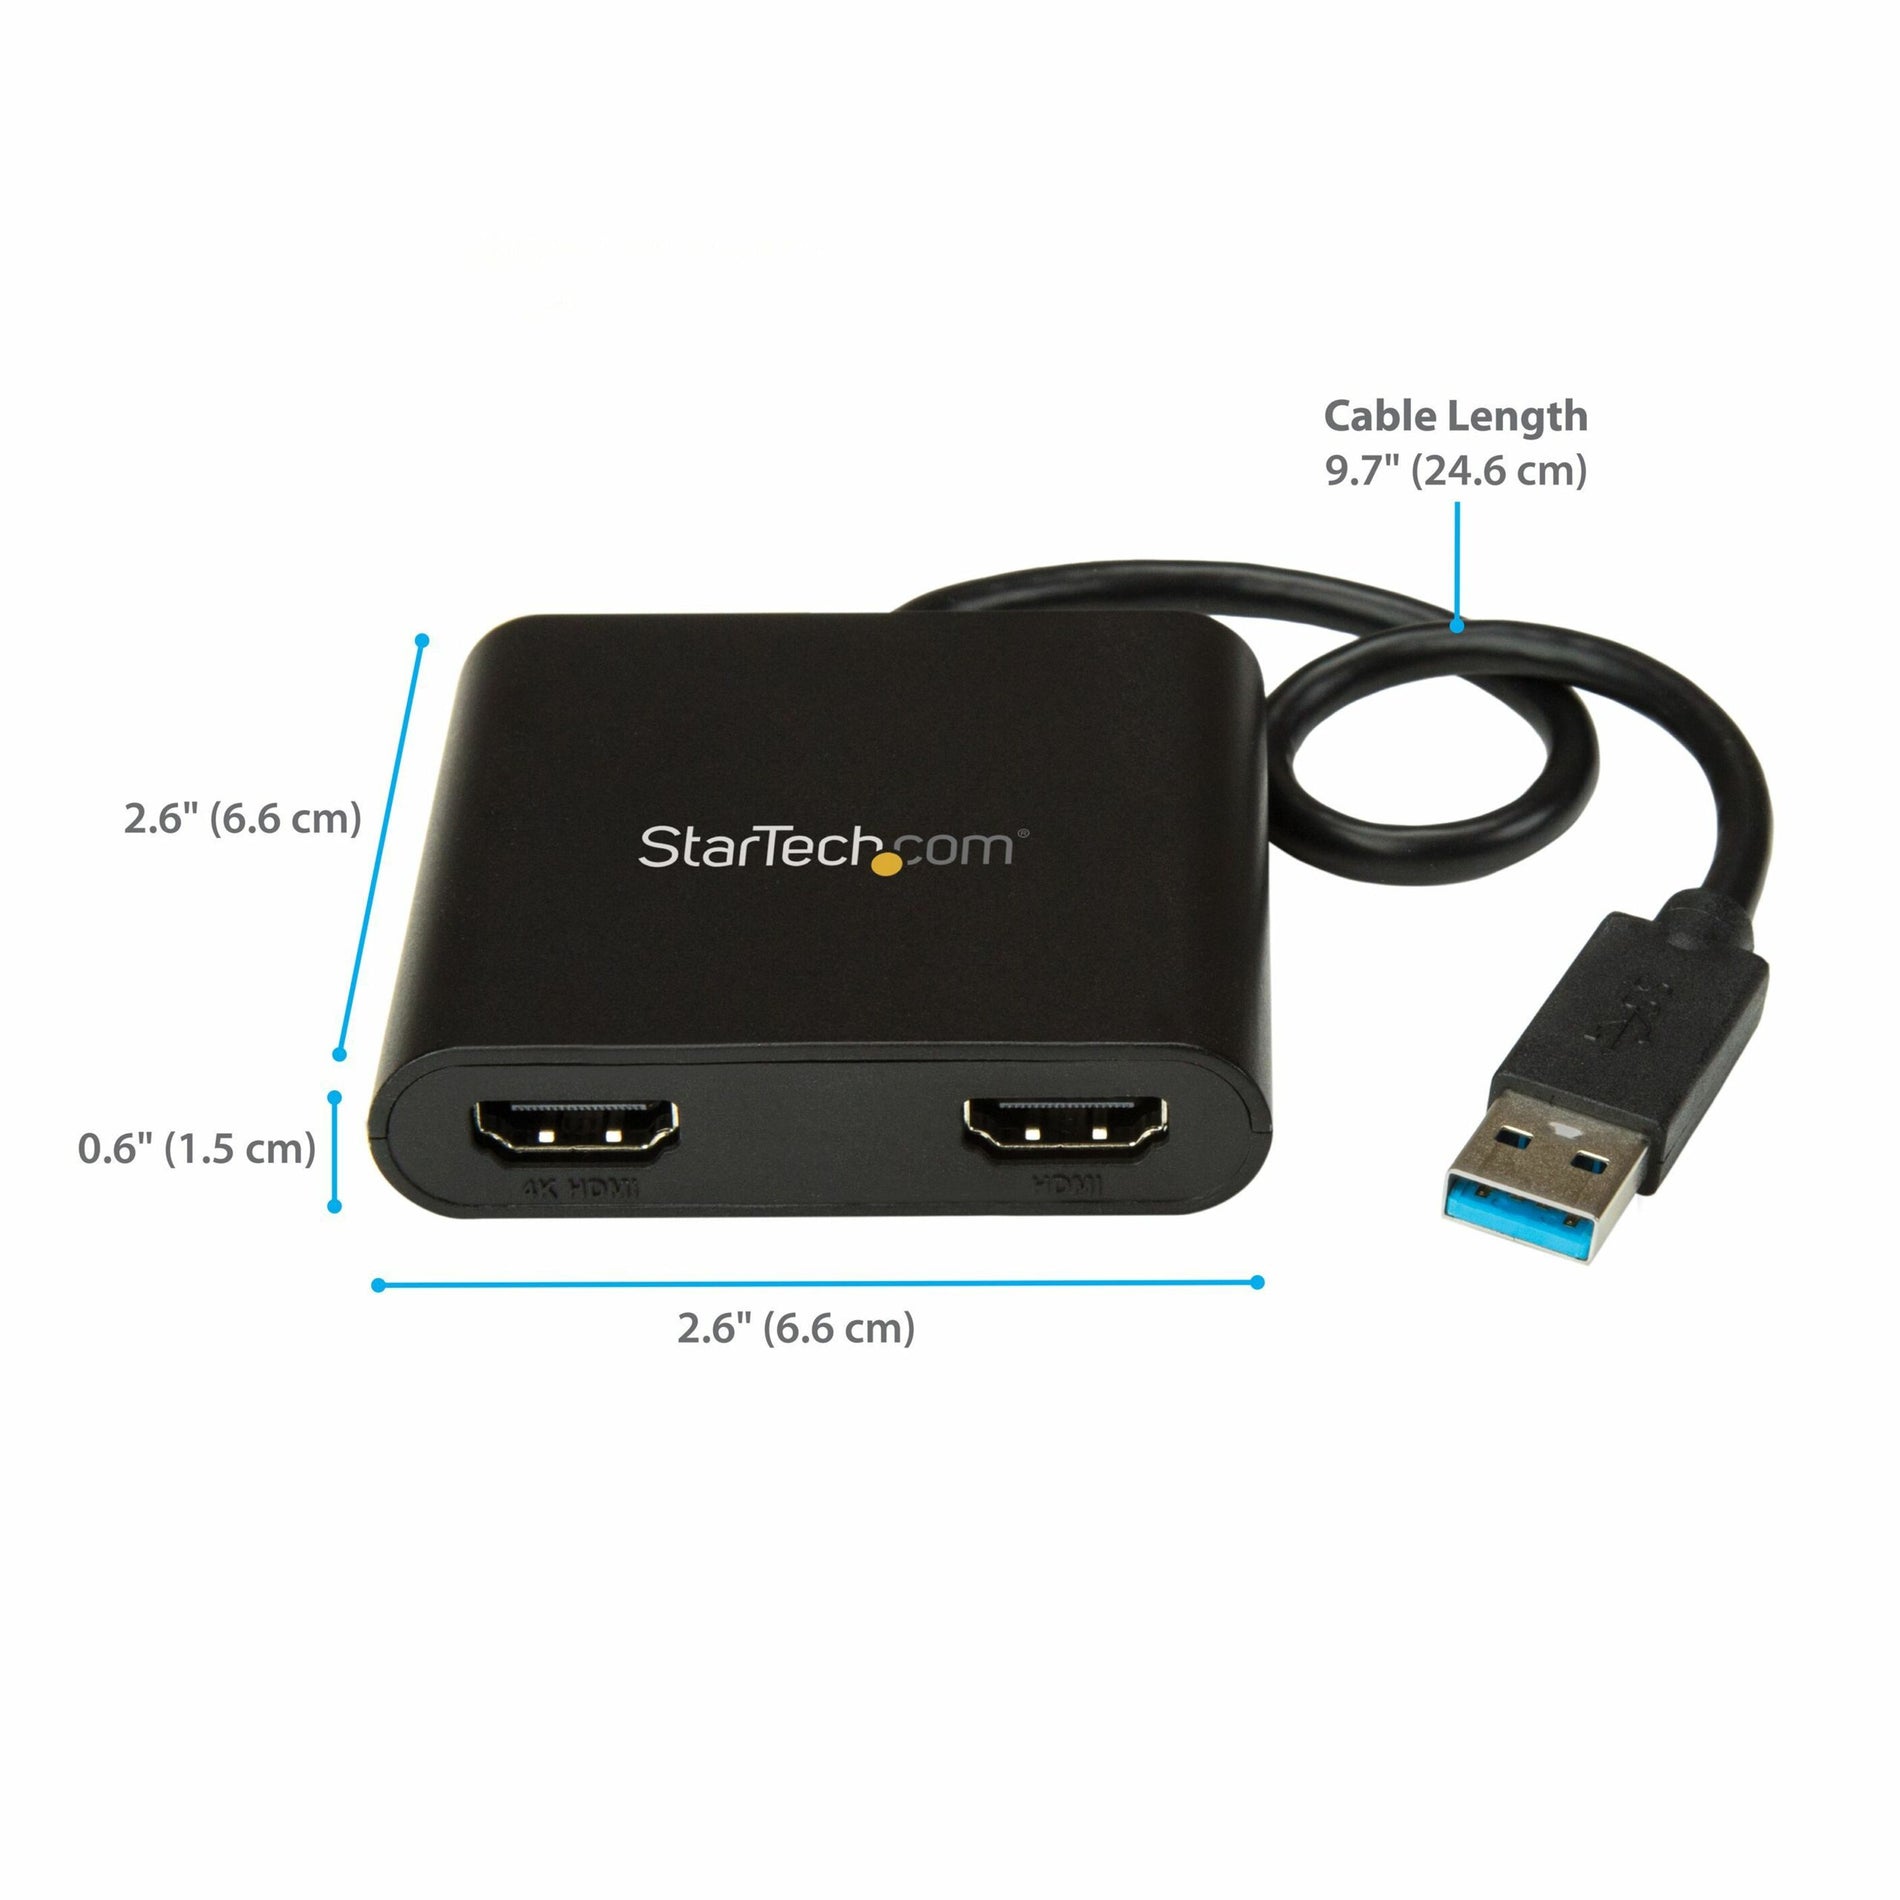 StarTech.com USB32HD2 USB to Dual HDMI Adapter - 4K, Connect Two HDMI Displays to a Single USB Port